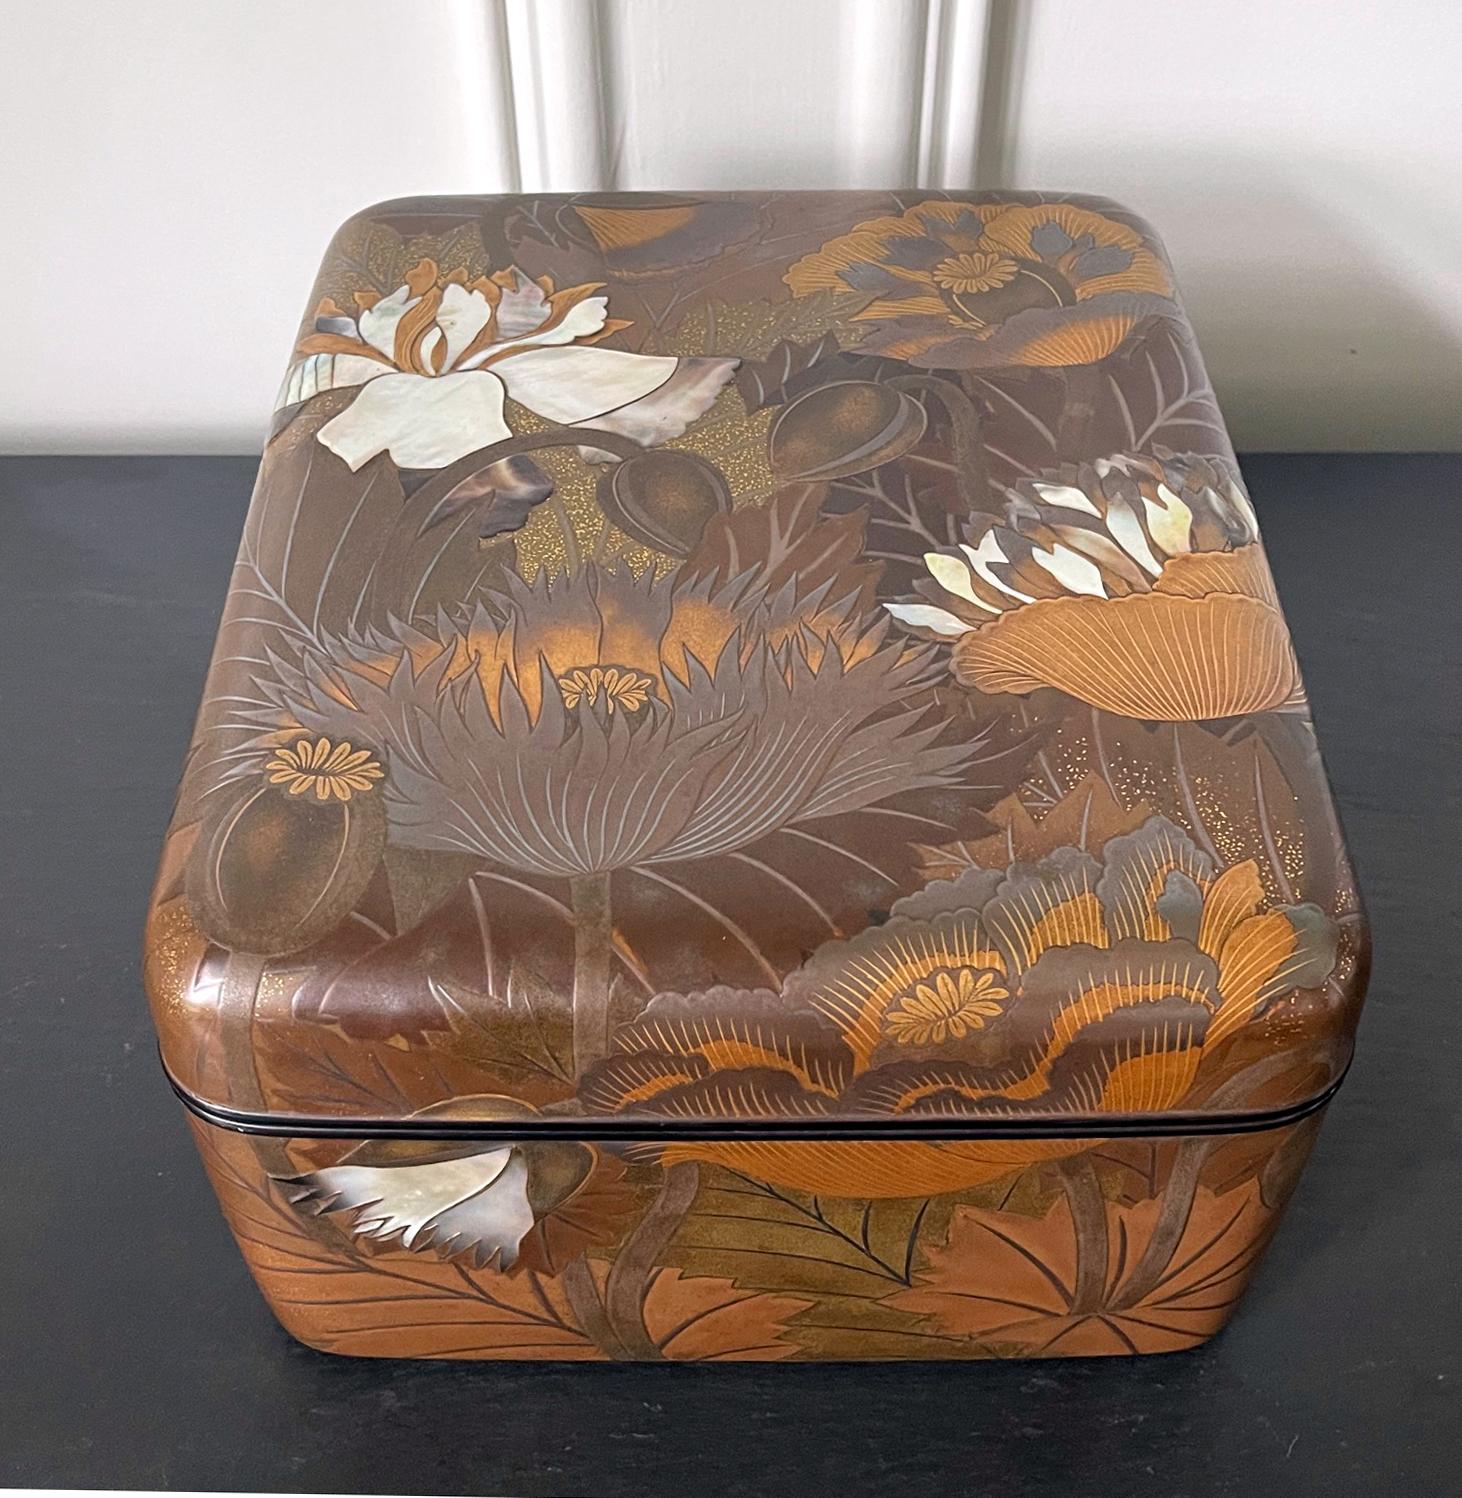 A magnificent lacquer box with intricate Maki-e decorations and mother of pearl in inlays by Japanese lacquer artist Ida Nobuaki (1892-1974). The box is dated early to mid-20th century (Showa period) and shows aspects of styling akin to the Art Deco